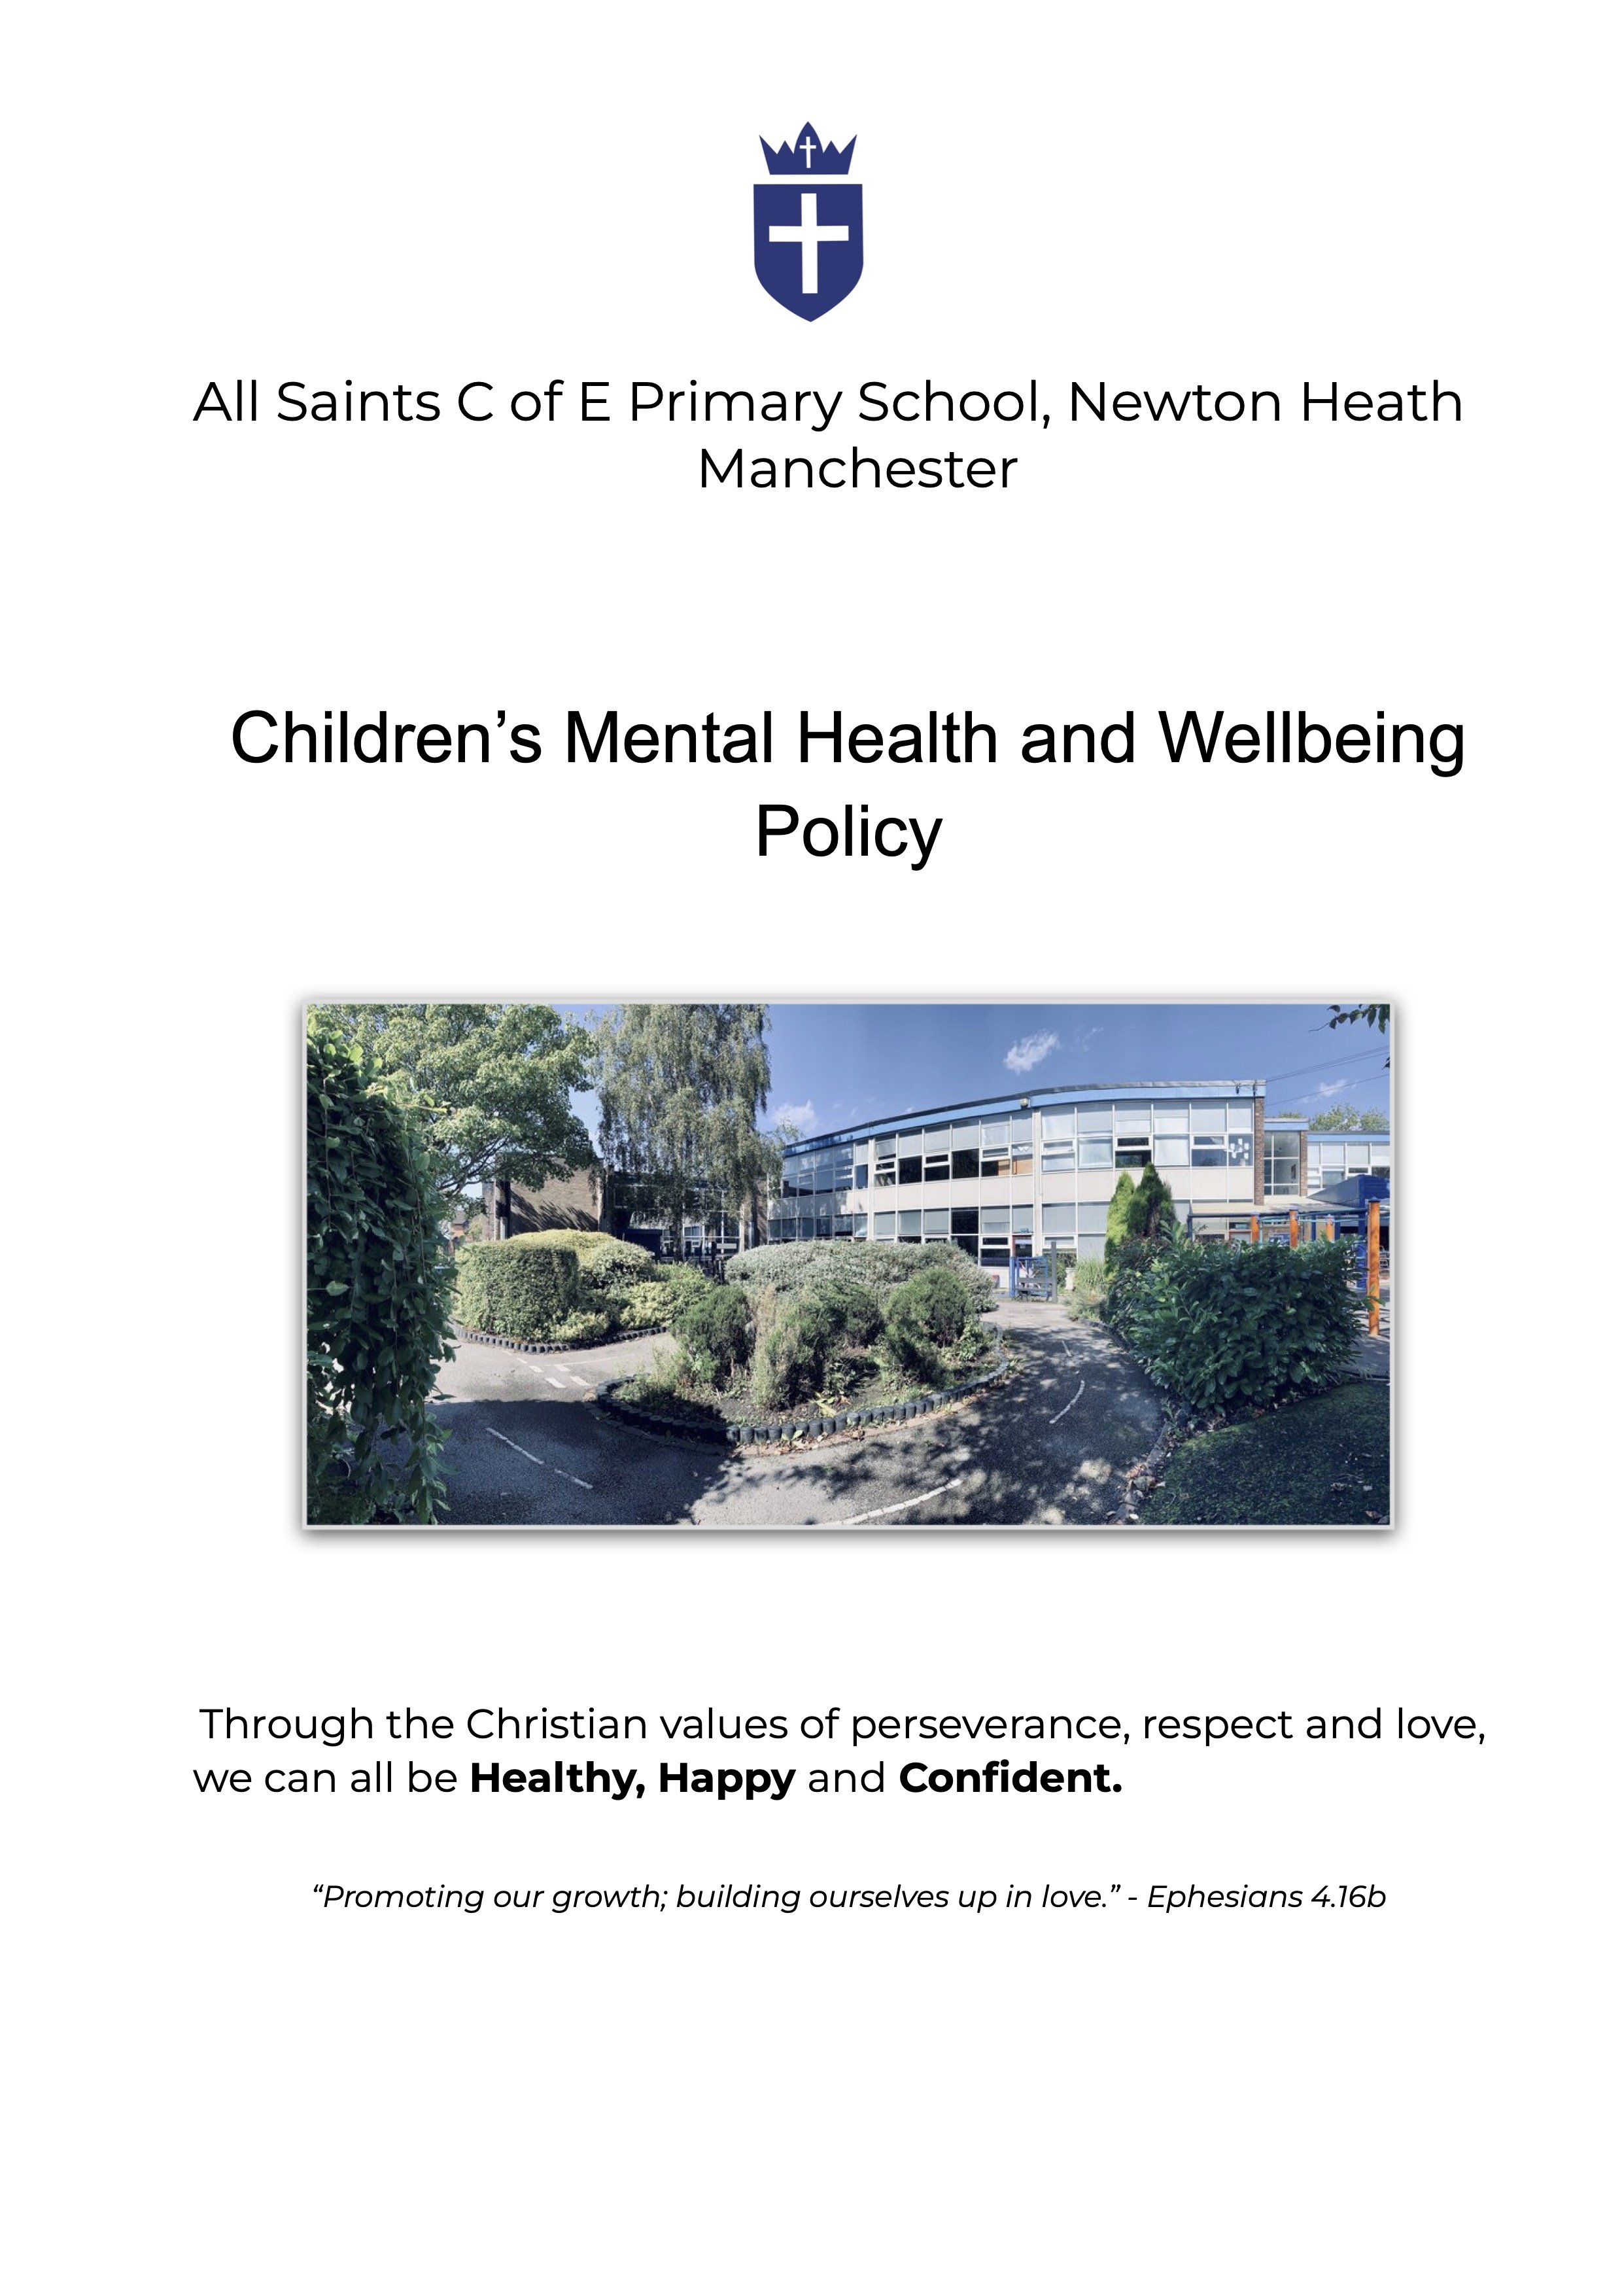 Chidrens' Mental Health and Wellbeing Policy.jpg